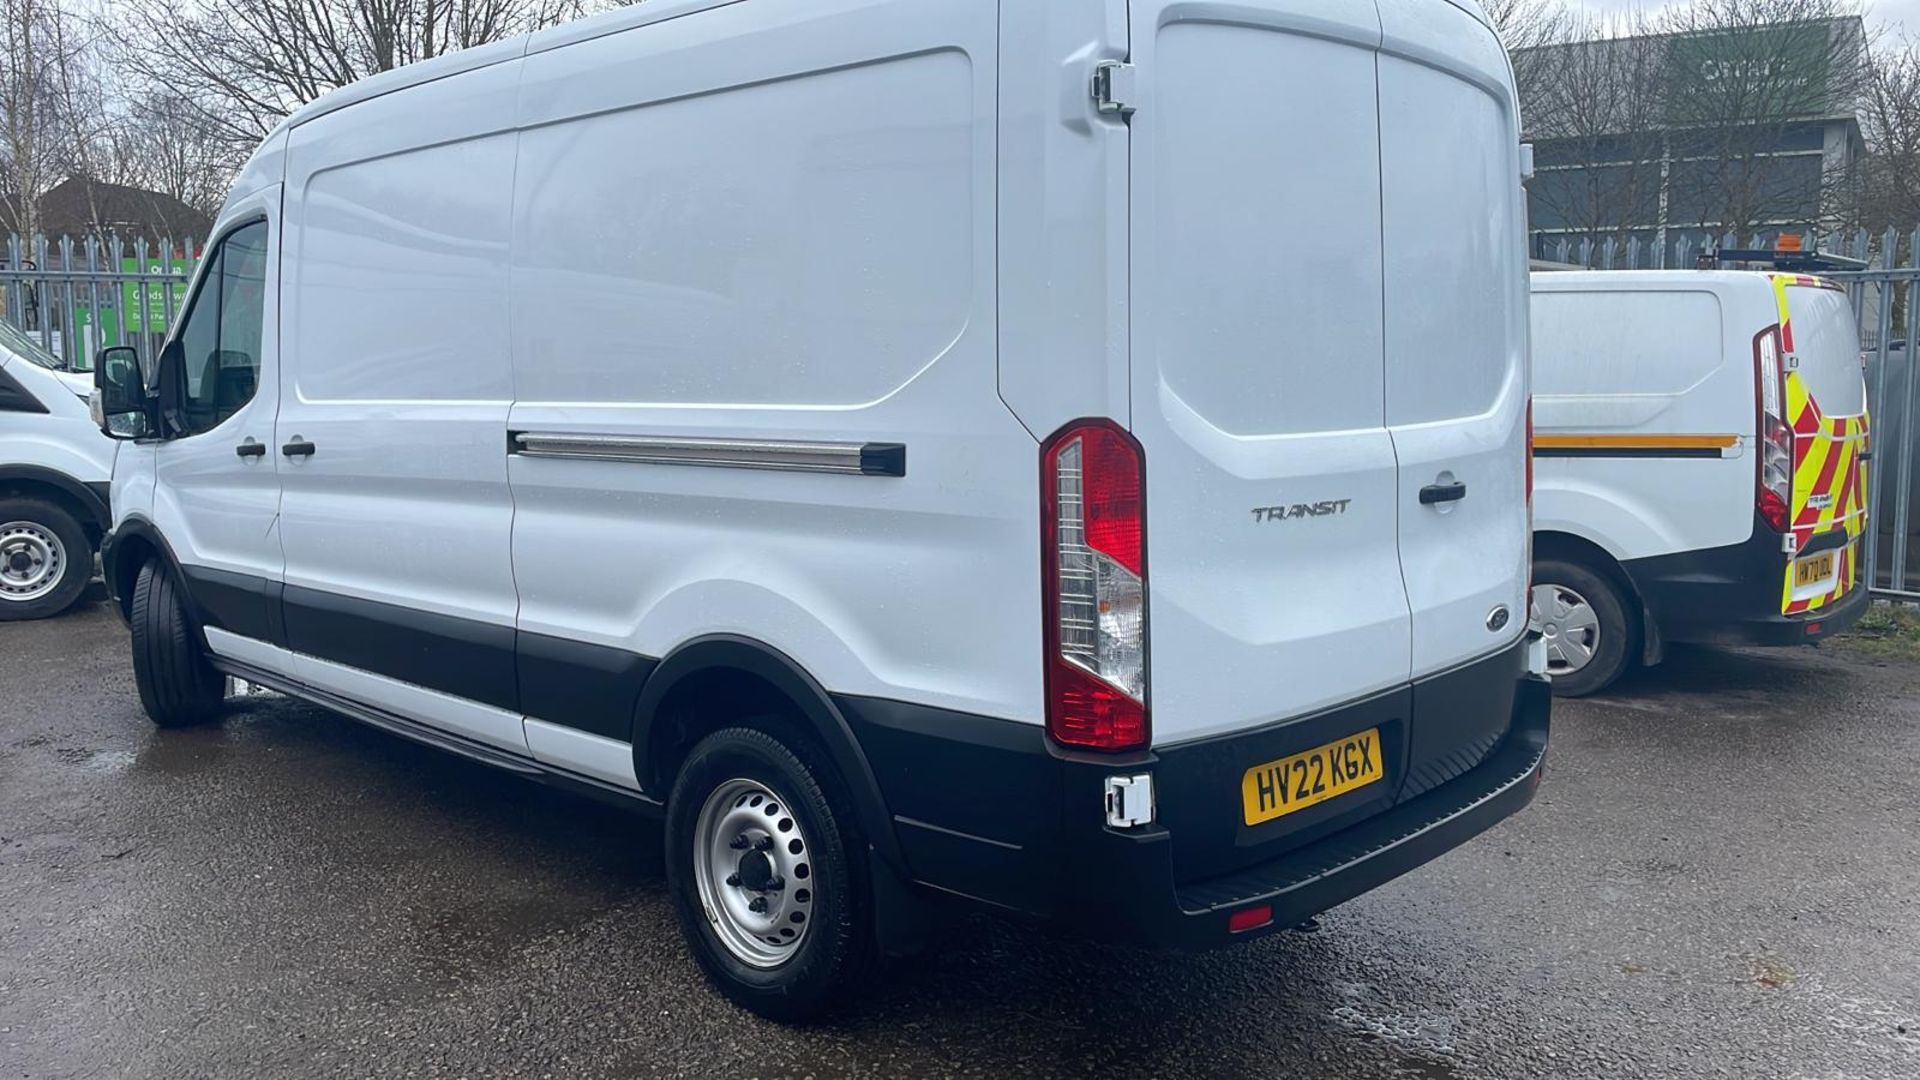 2022 22 PLATE FORD TRANSIT 350 LEADER ECO BLUE PANEL VAN - 24,186 WARRANTED MILES - FWD. - Image 3 of 9